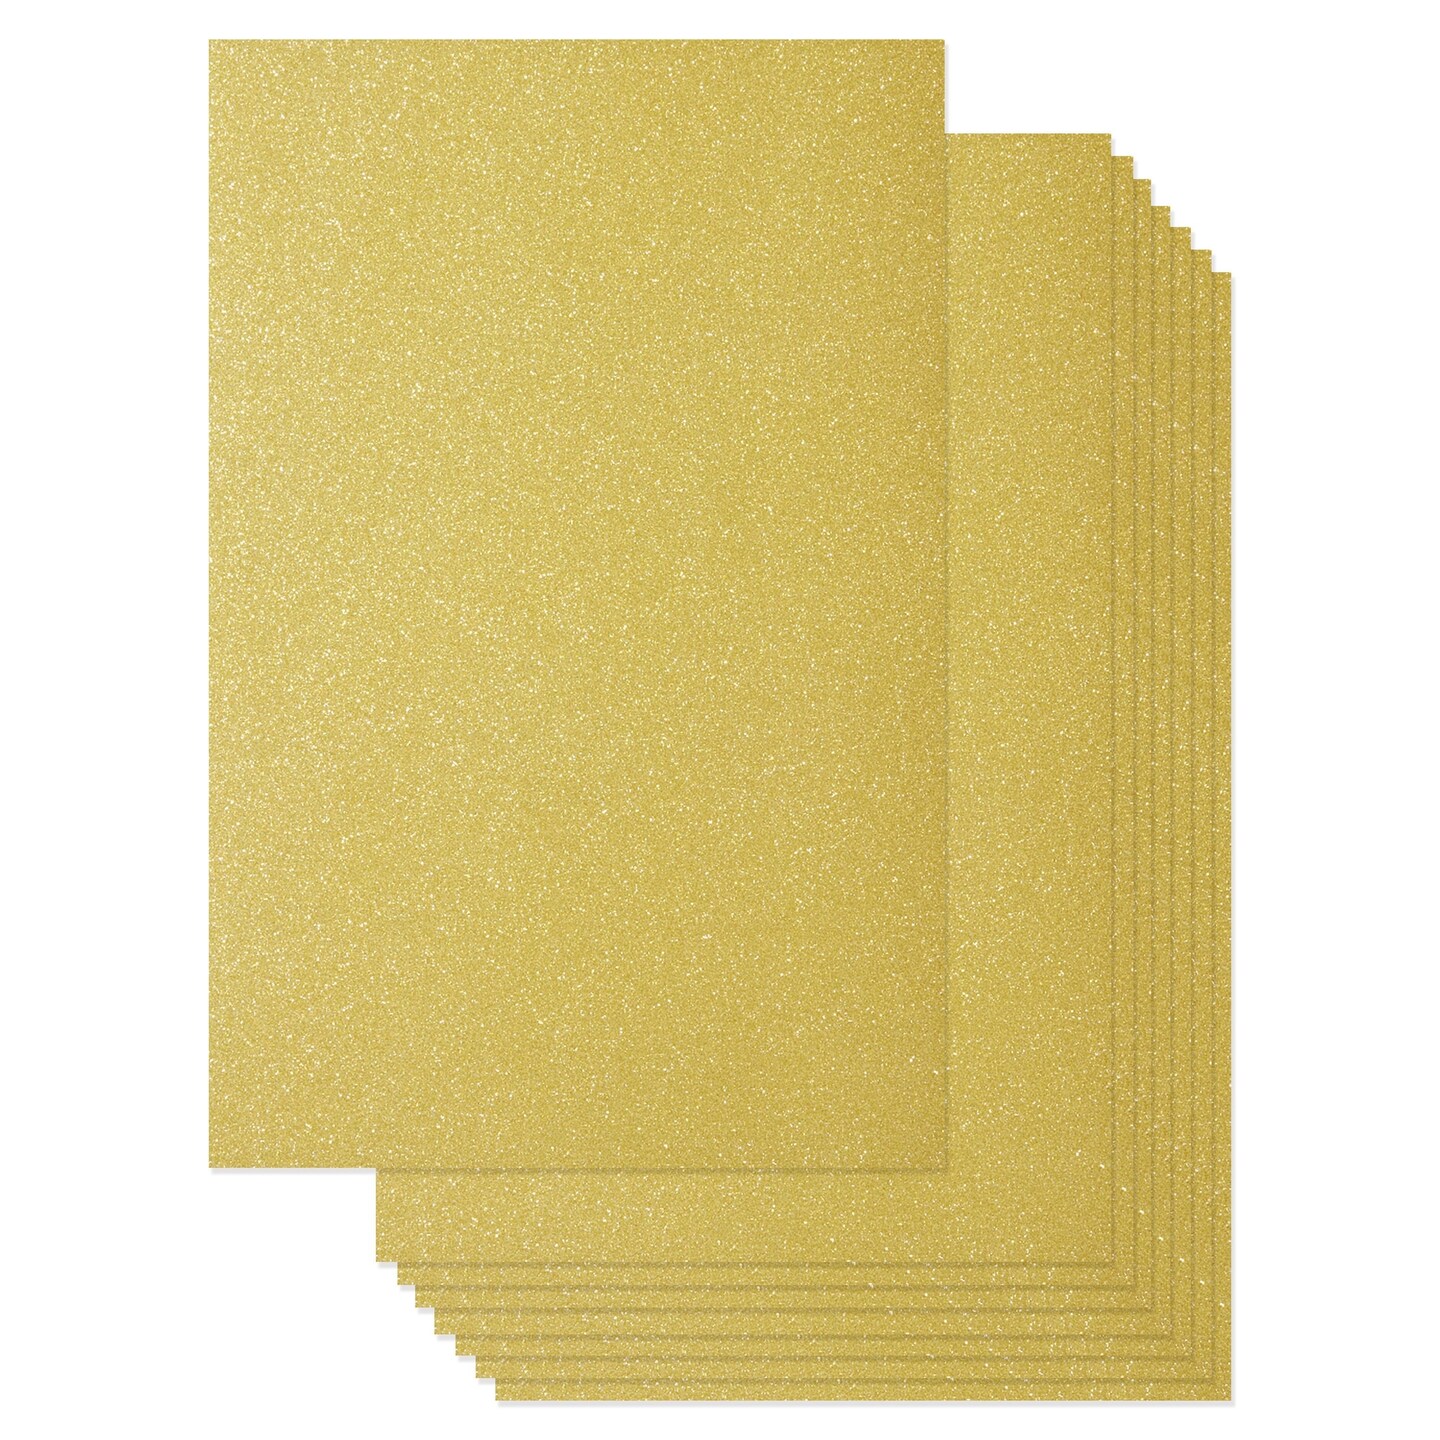 Bright Yellow Cardstock - A4 - 250 Gsm | Dmcp7547